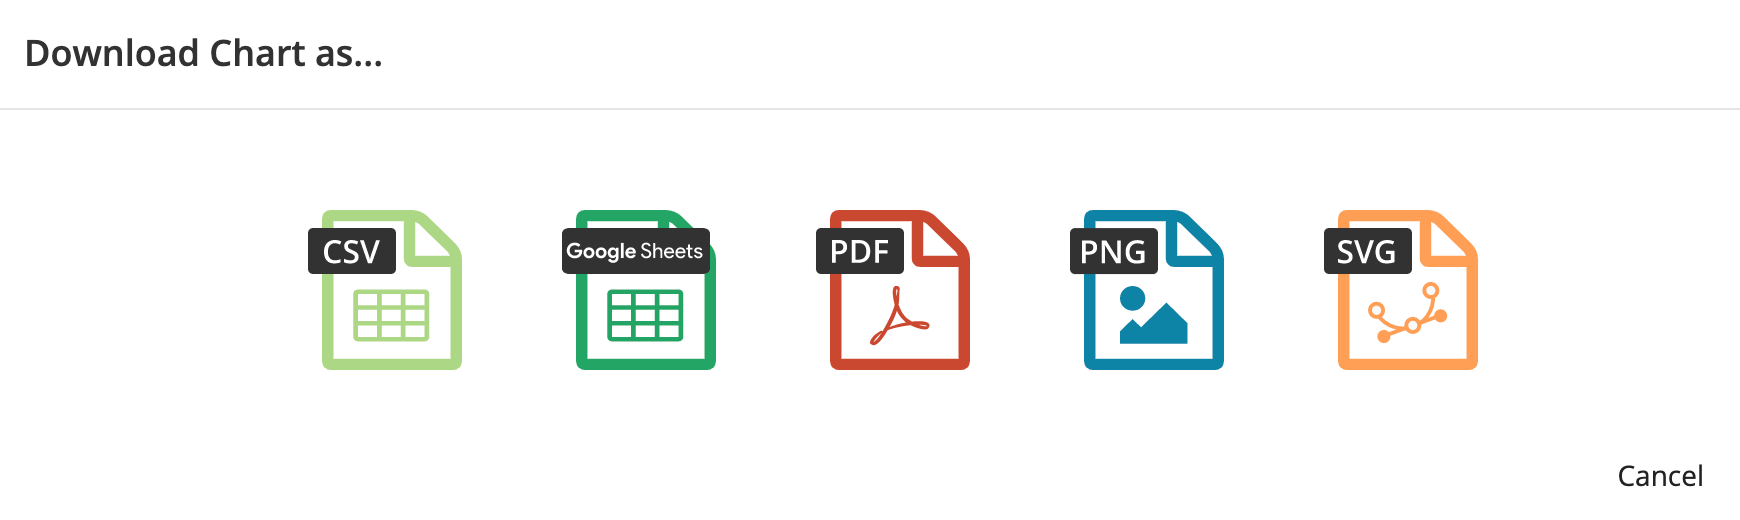 Download your chart data as a CSV, Google Sheet, PDF, PNG, or SVG